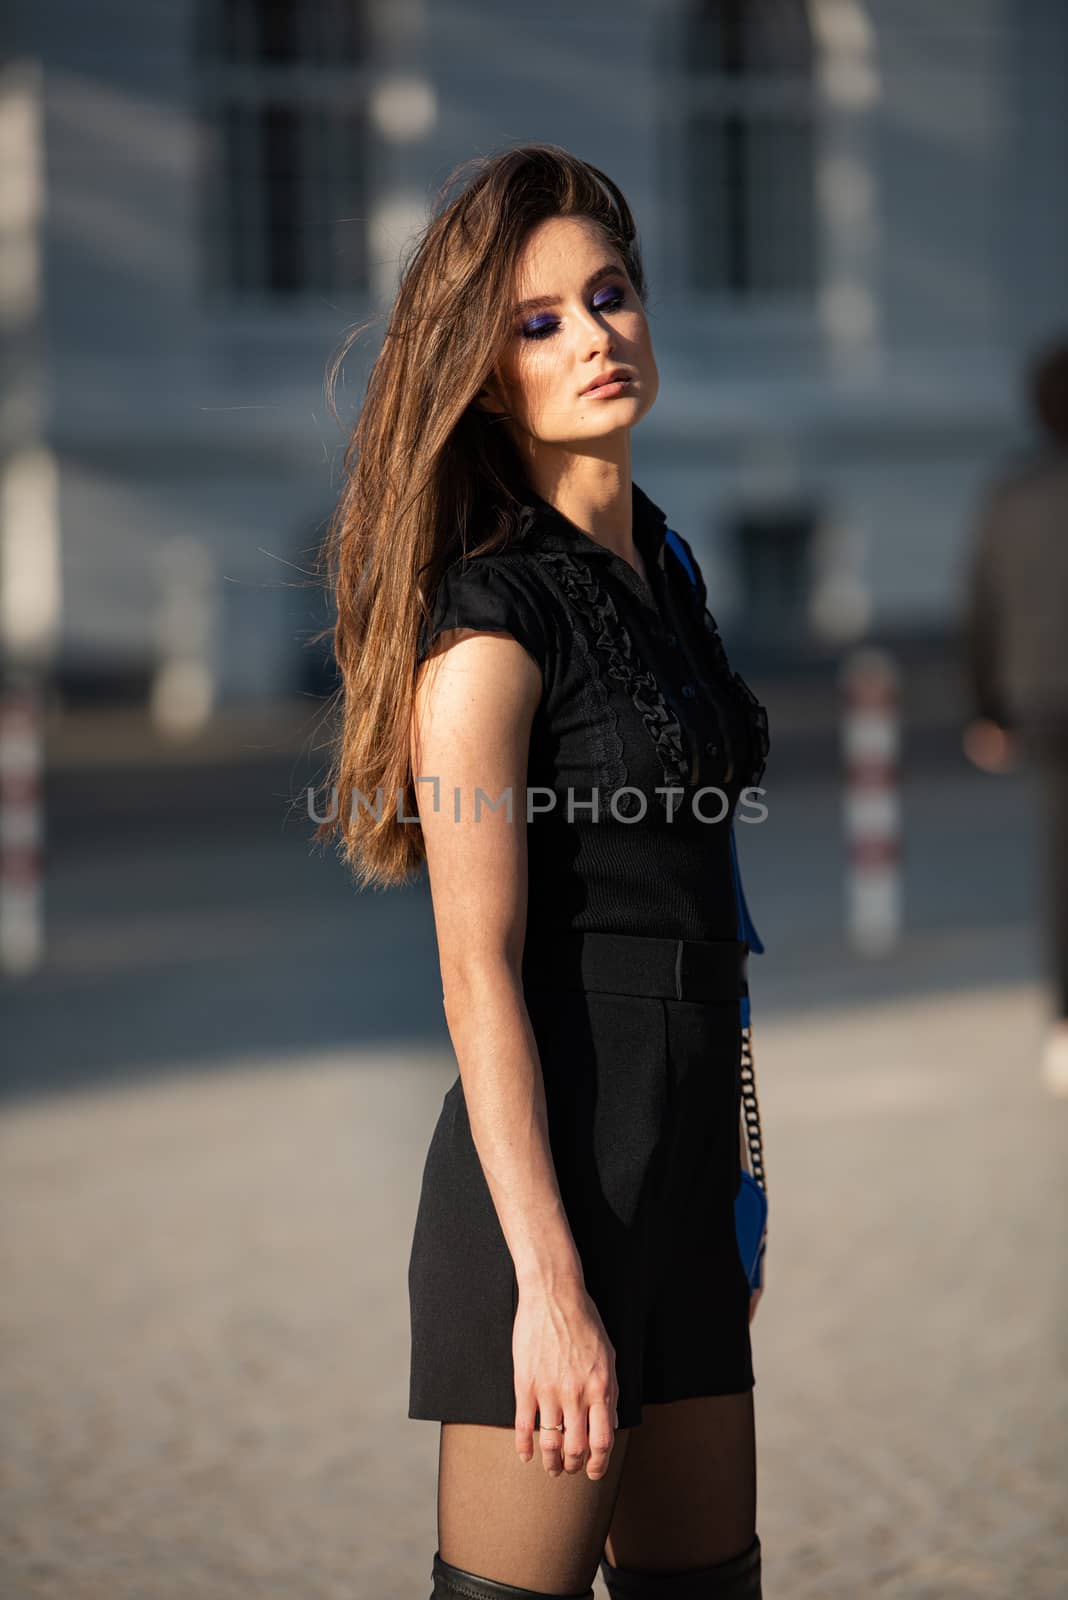 woman on street business portrait model person young beauty walking by timwit